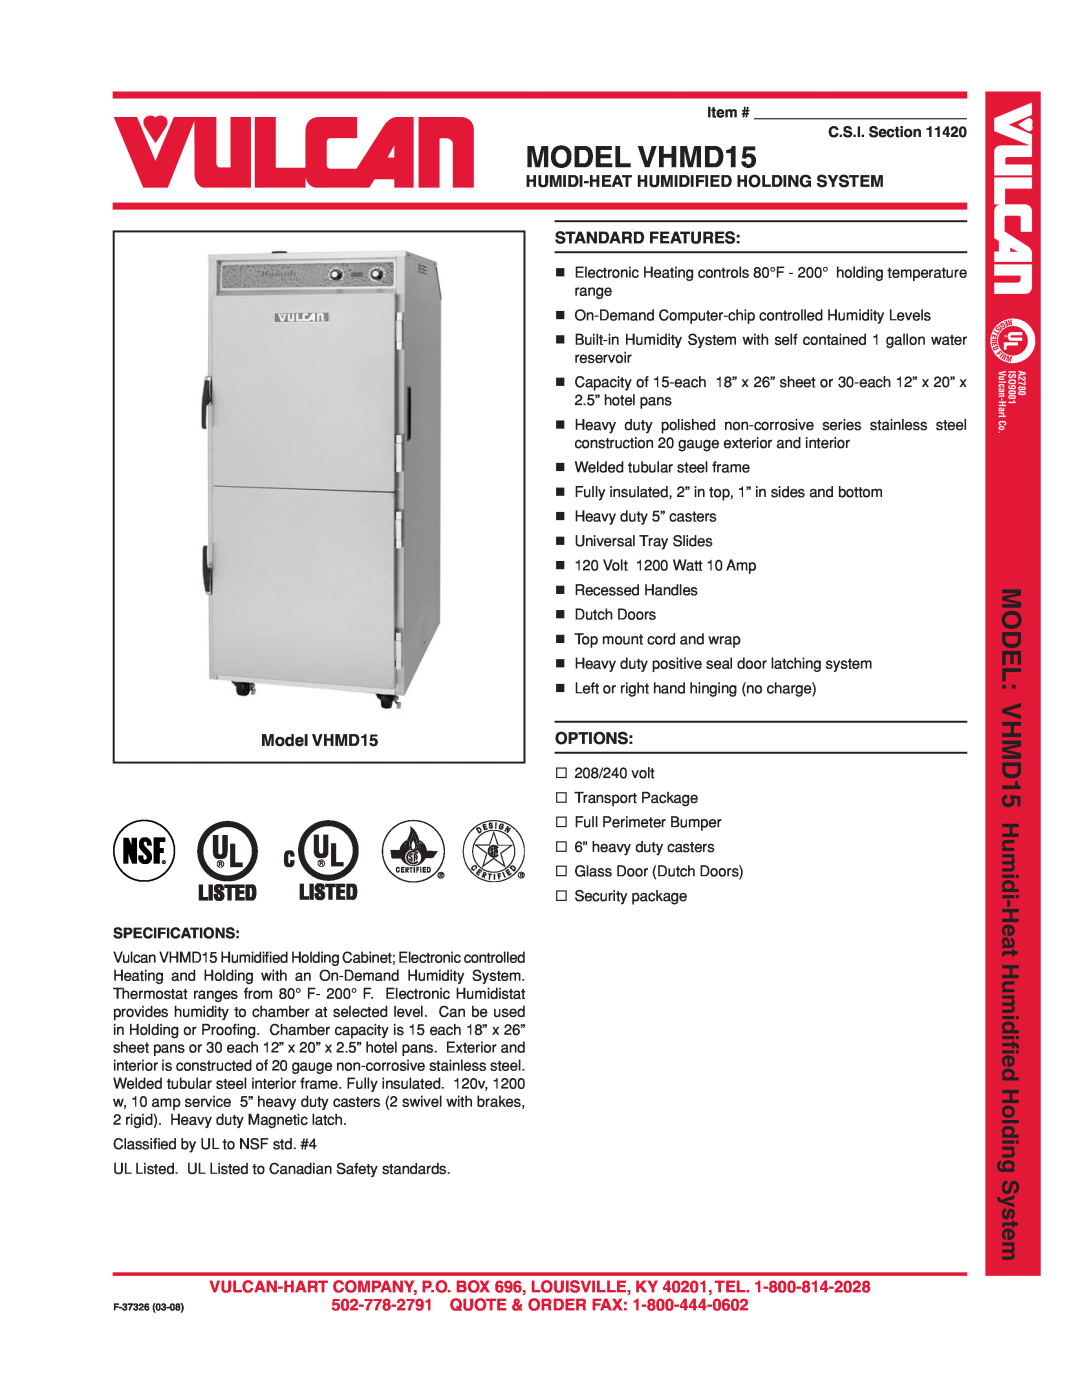 Vulcan-Hart specifications MODEL VHMD15, Humidi-Heathumidified Holding System, Model VHMD15, Standard Features, Options 